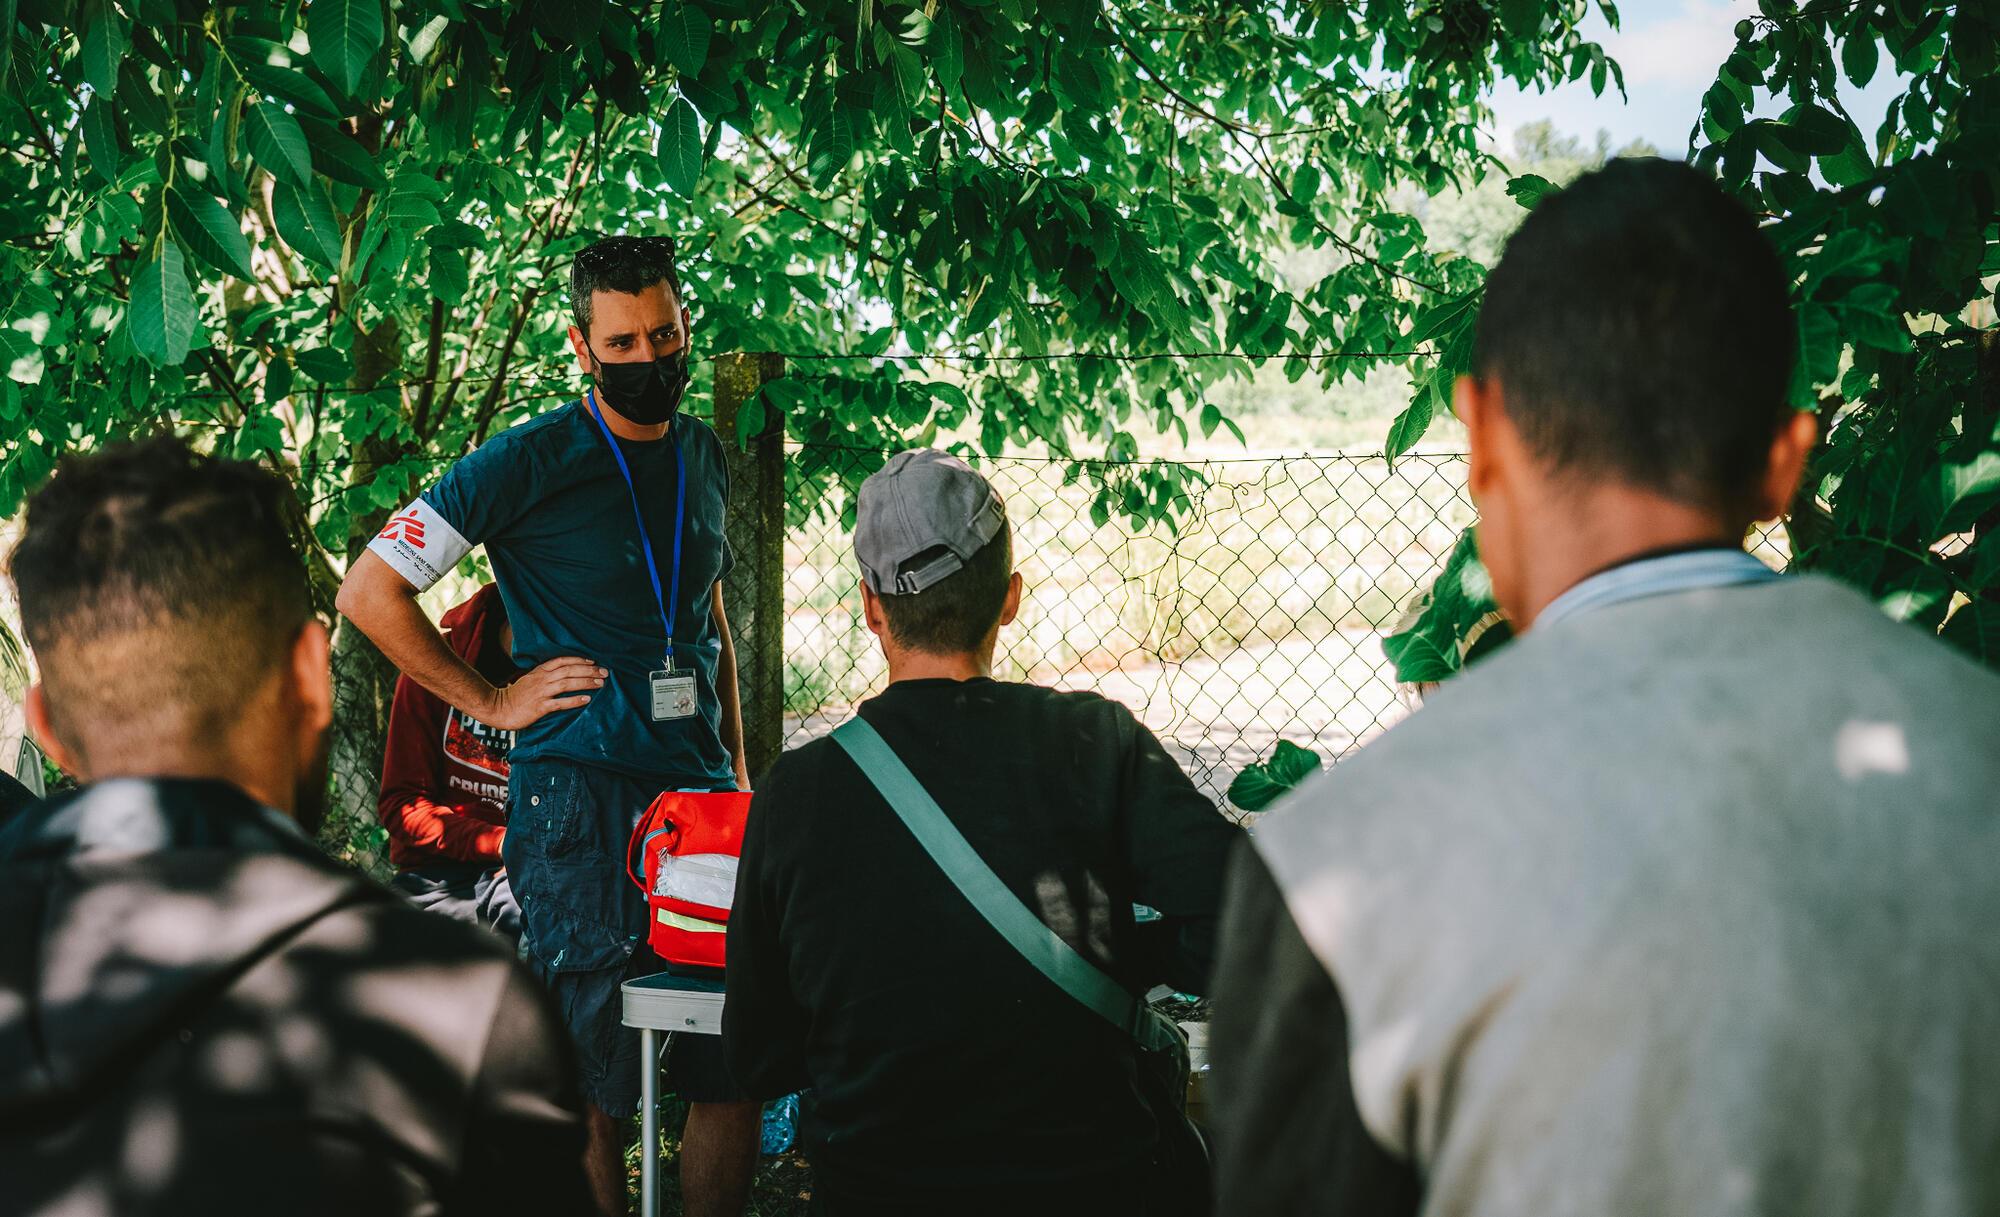 An MSF cultural mediator speaks to patients waiting for a medical consultation at the MSF mobile clinic in Horgos 2 border crossing area in Serbia. 